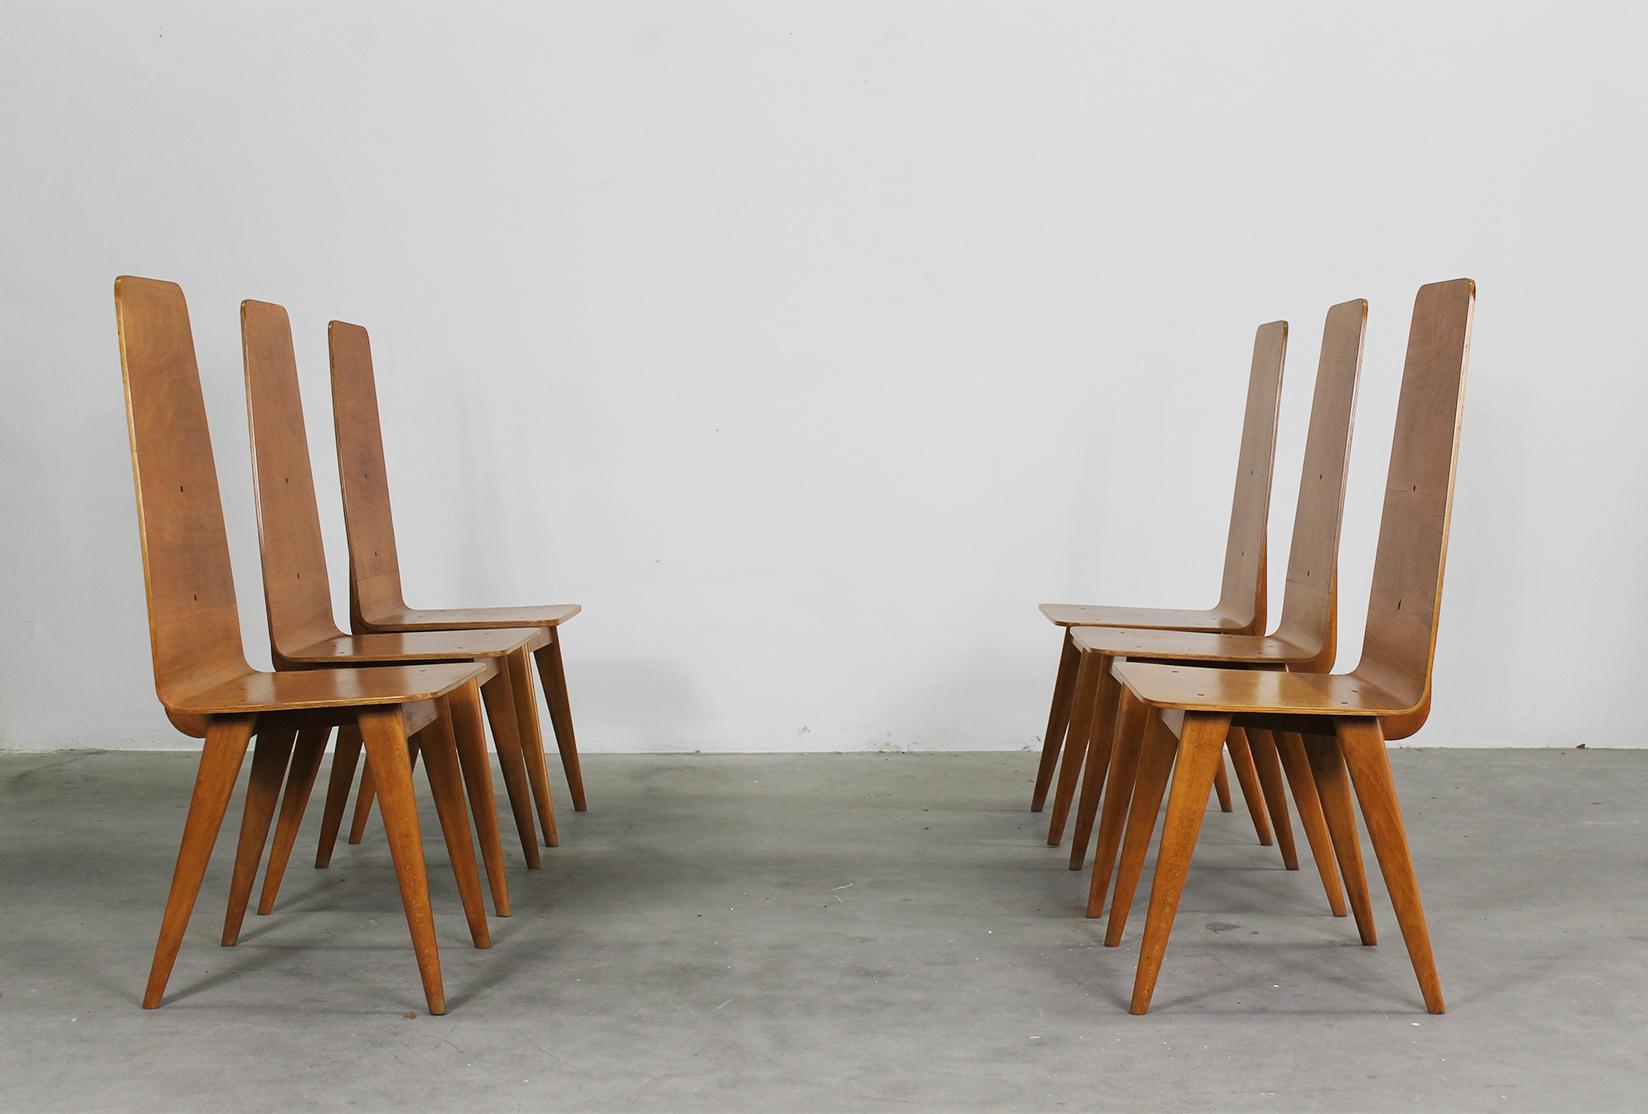 A very rare set of six dining chairs entirely made in curved wood, this set was designed by the Italian artist Sineo Gemignani and manufactured in Italy during the 1940s.

The artist was born in Livorno on 30 July 1917, but around the early 1920s,